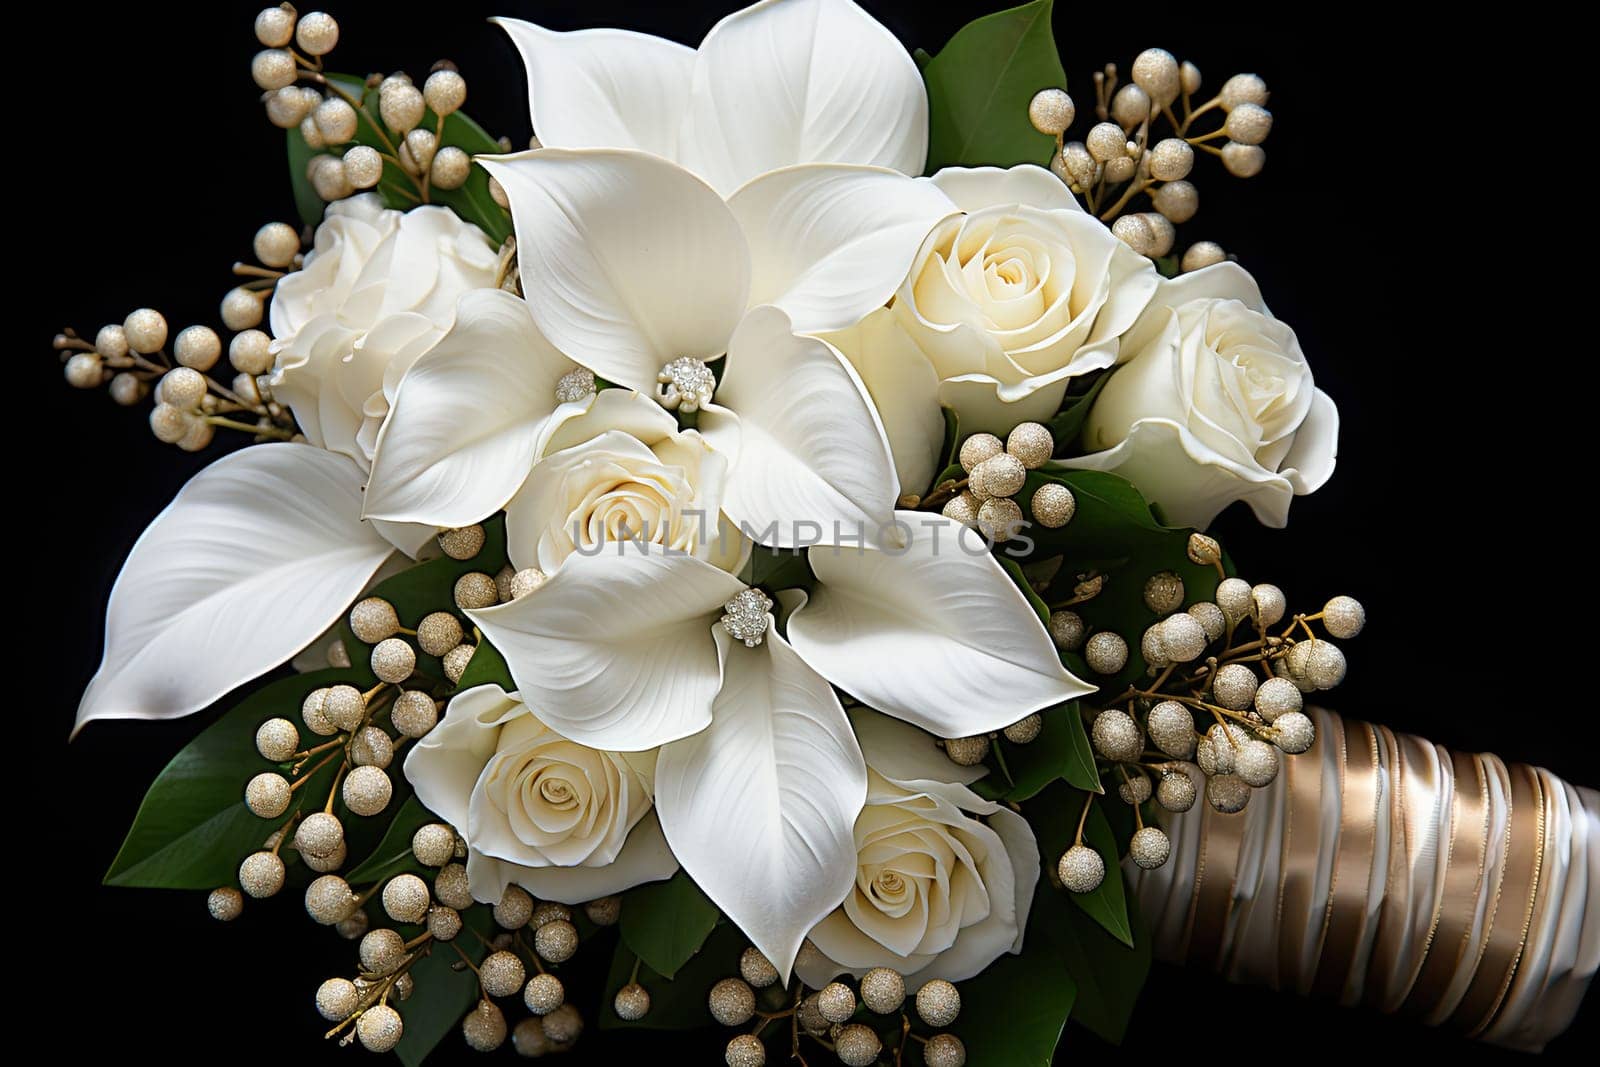 A bridal bouquet of white flowers and greenery by golibtolibov